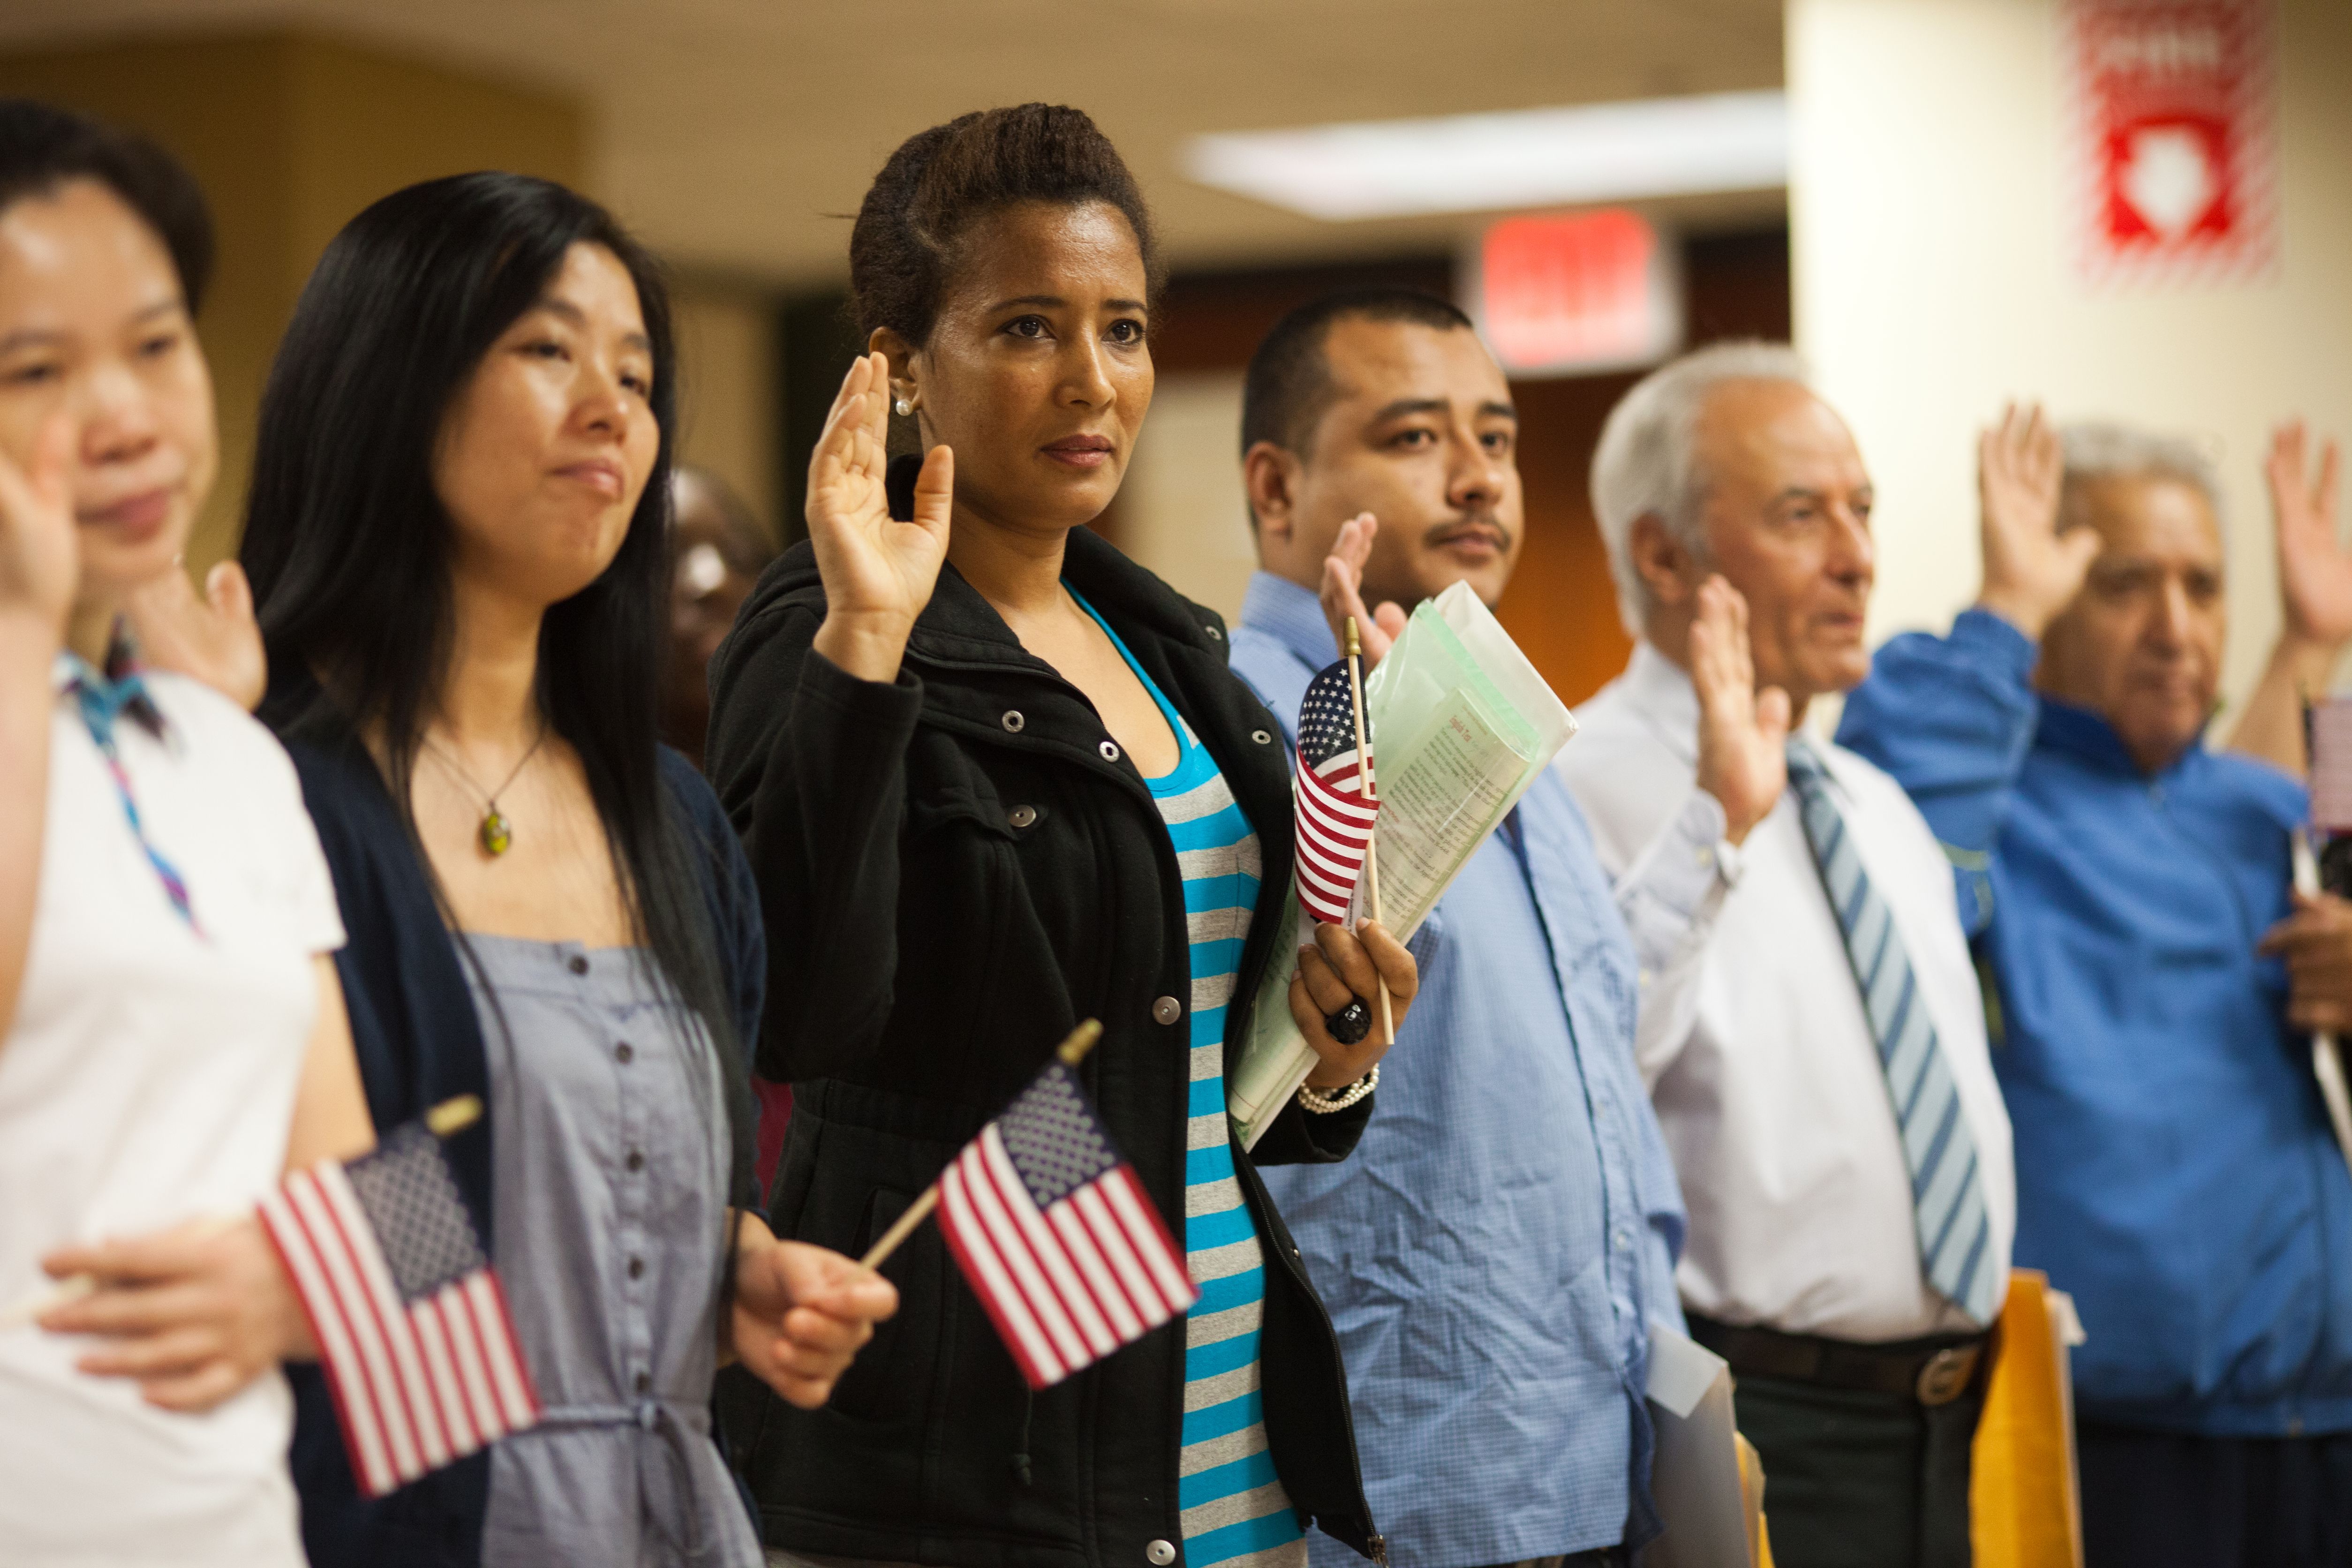 Naturalized citizens explain why they're American by choice | CNN